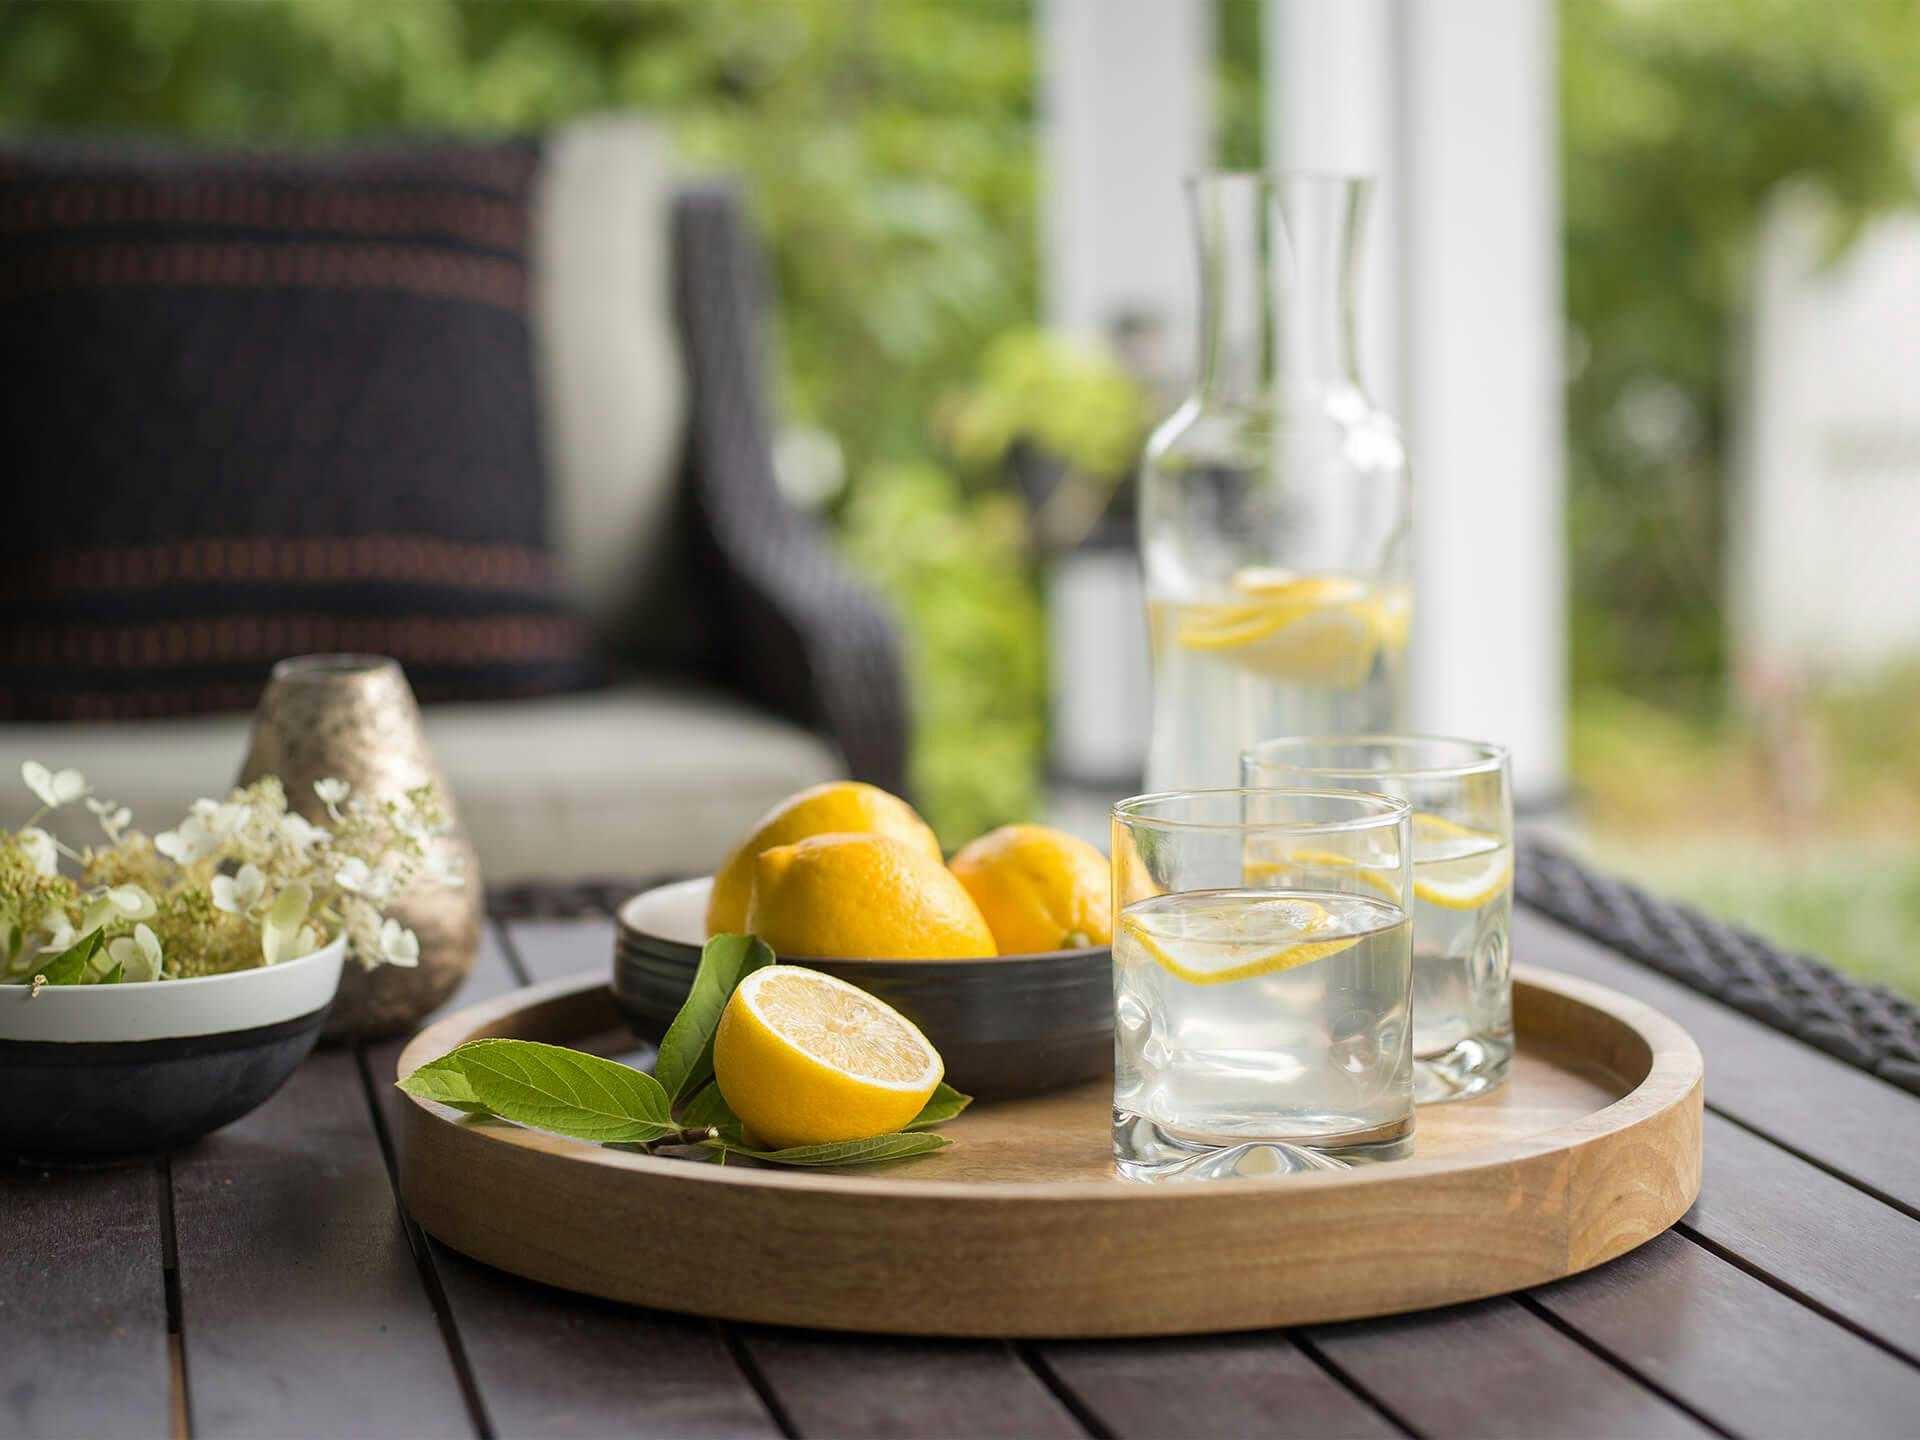 Patio lifestyle with lemons and drinks on table.